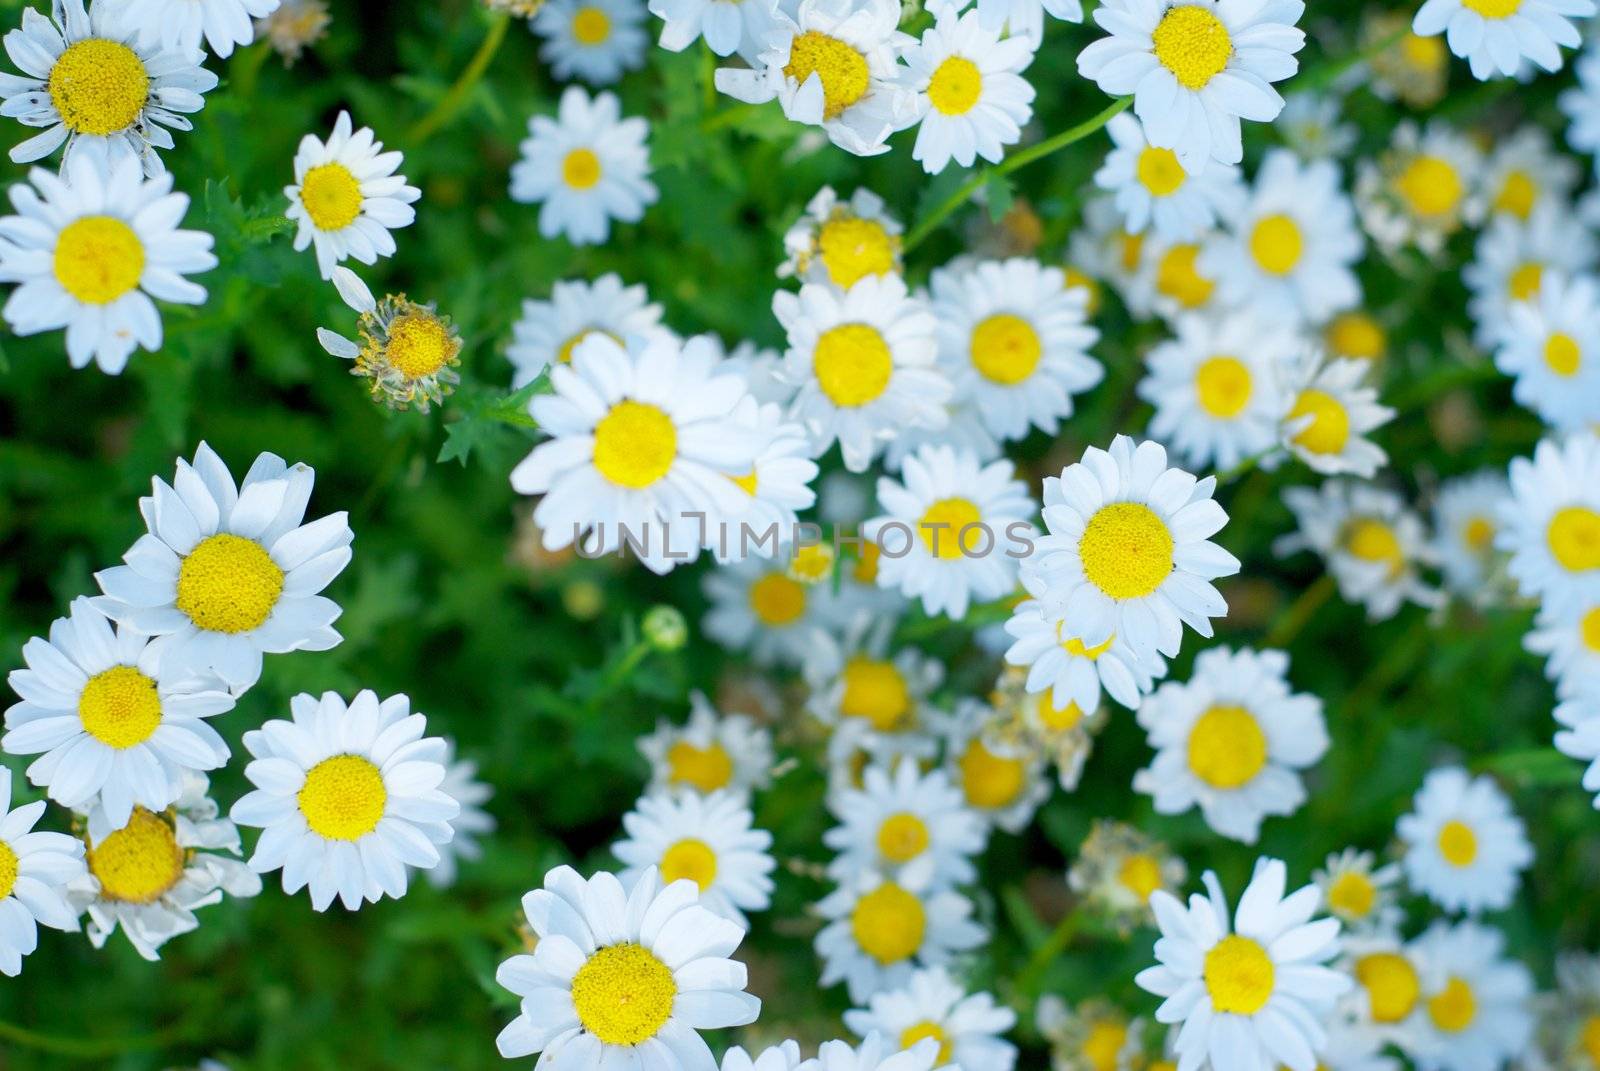 A Bunch of Spring Daisies by pixelsnap